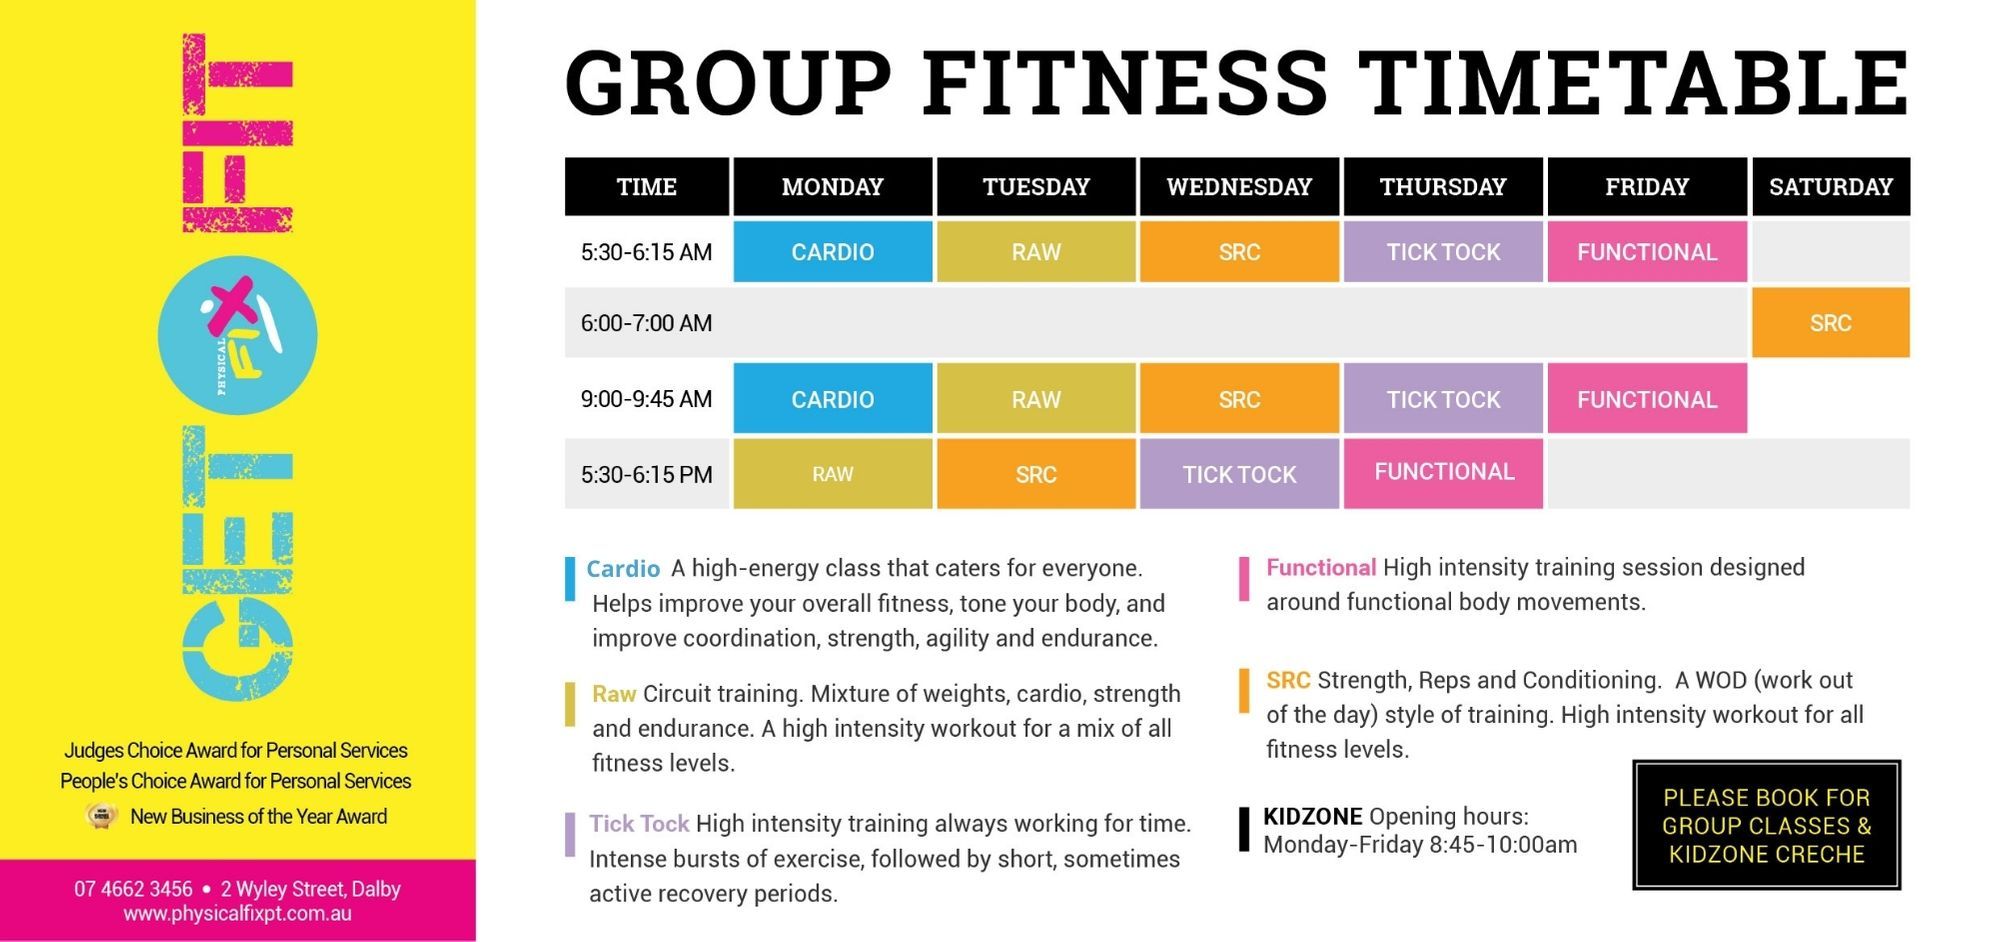  Physical Fix Group Fitness Timetable from Monday to Saturday